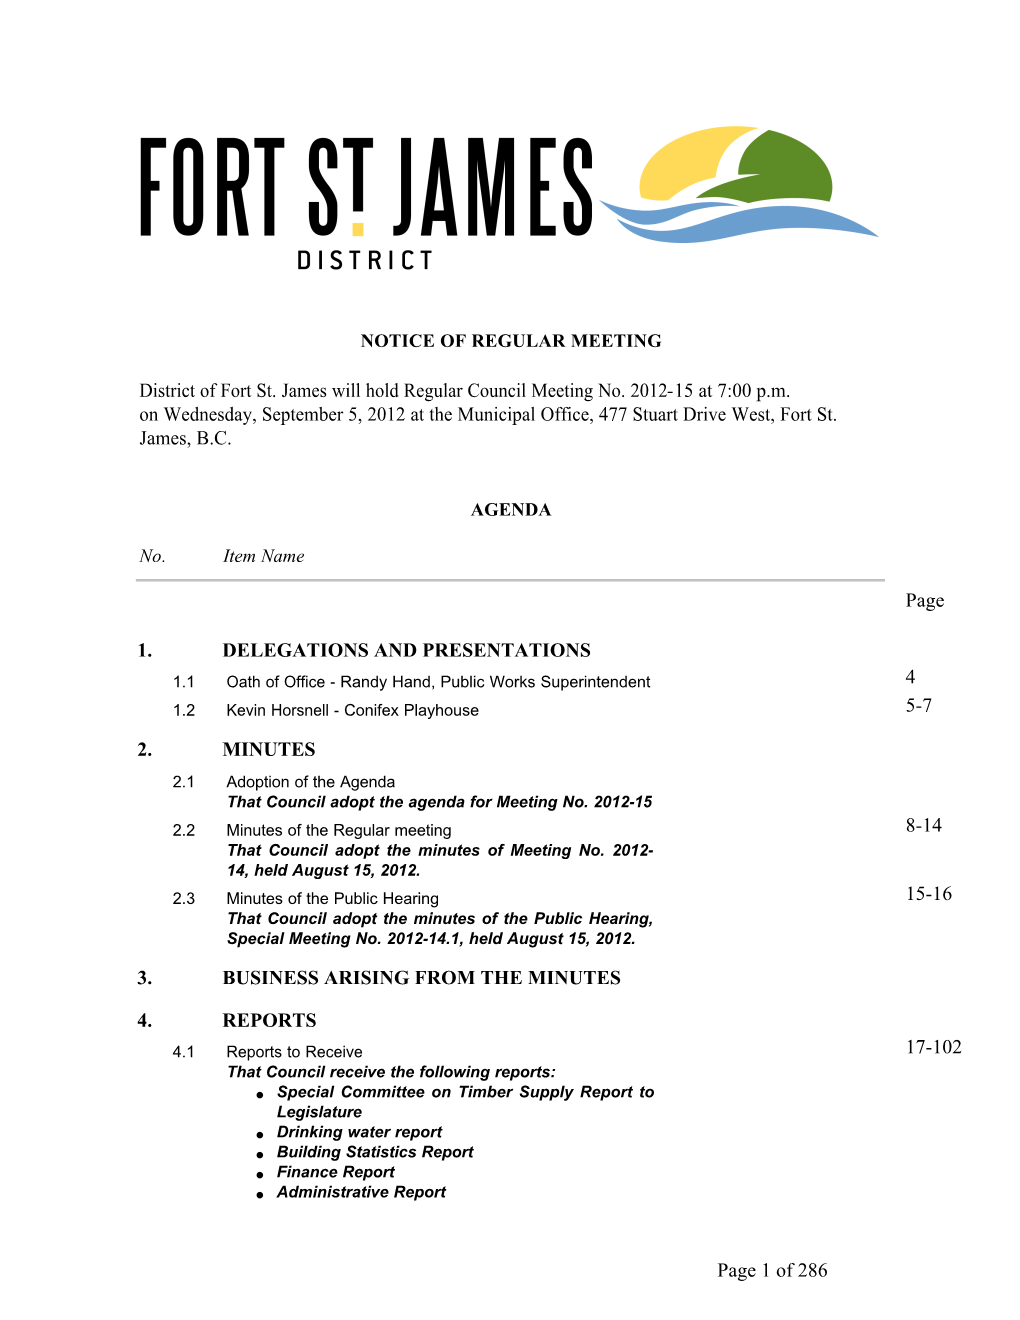 District of Fort St. James Will Hold Regular Council Meeting No. 2012-15 at 7:00 P.M